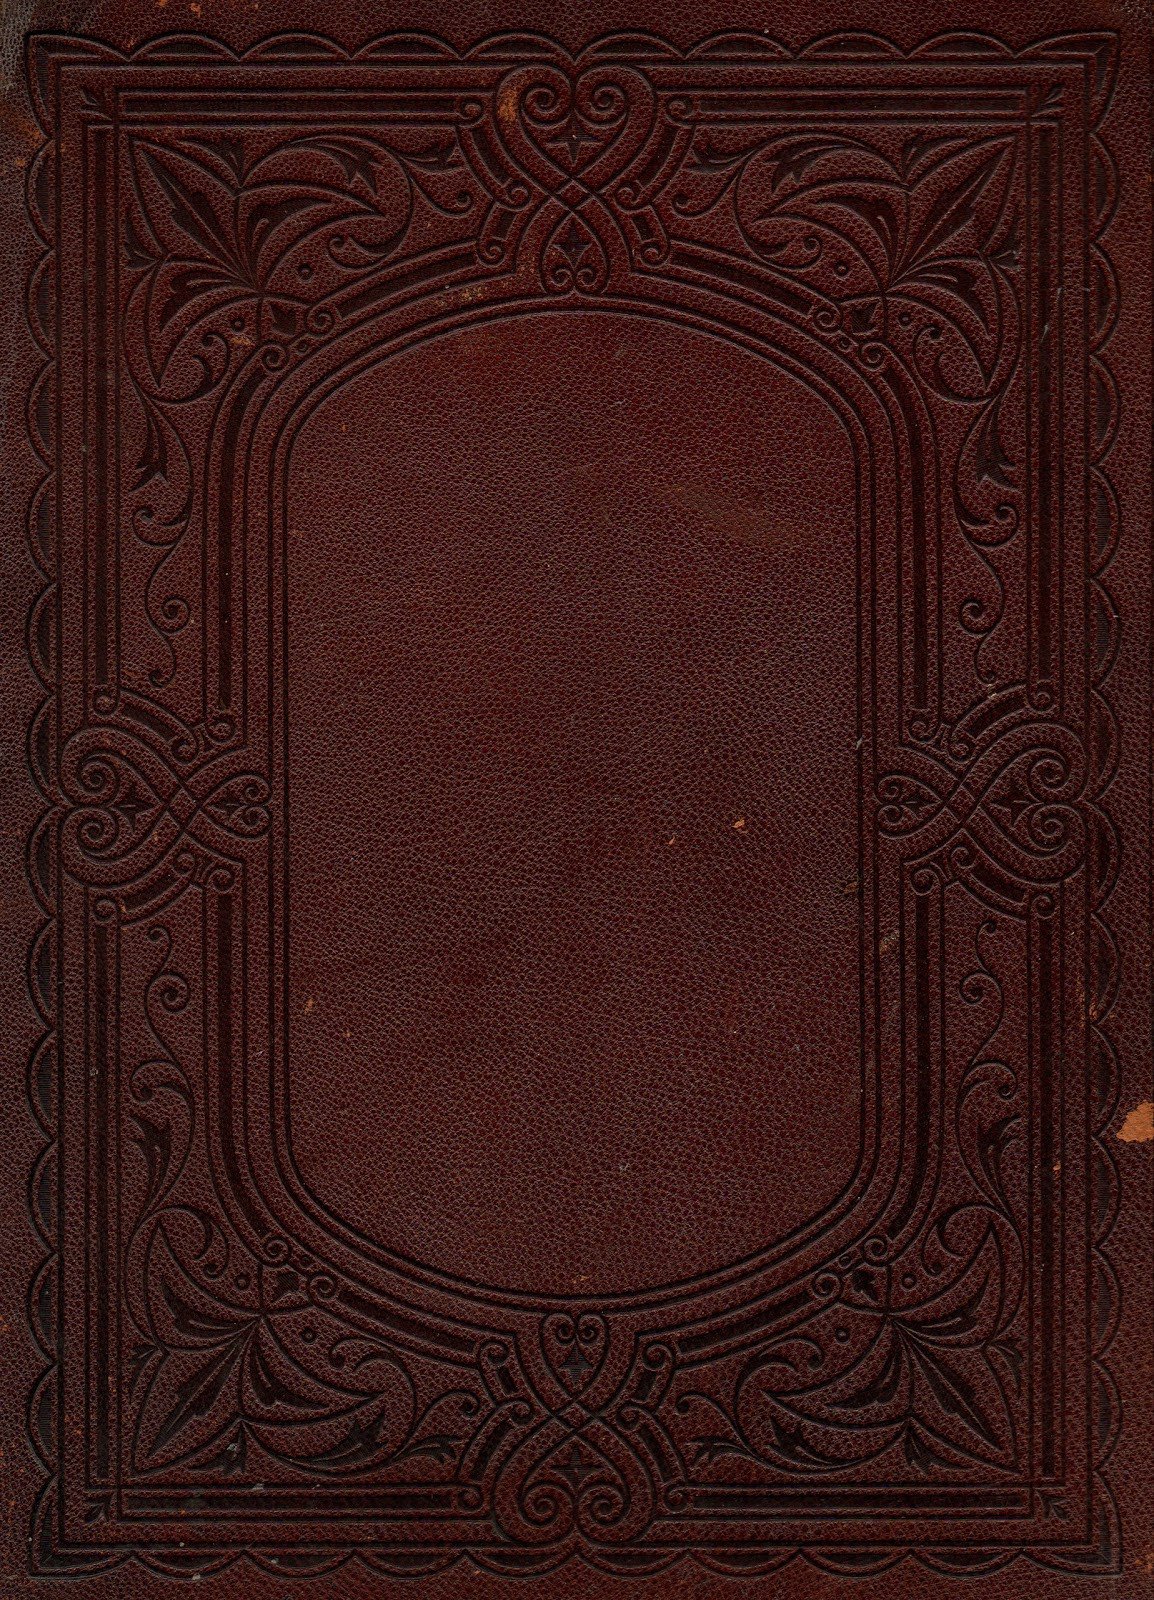 Leaping Frog Designs Antique Book Cover Frame Free PNG Image